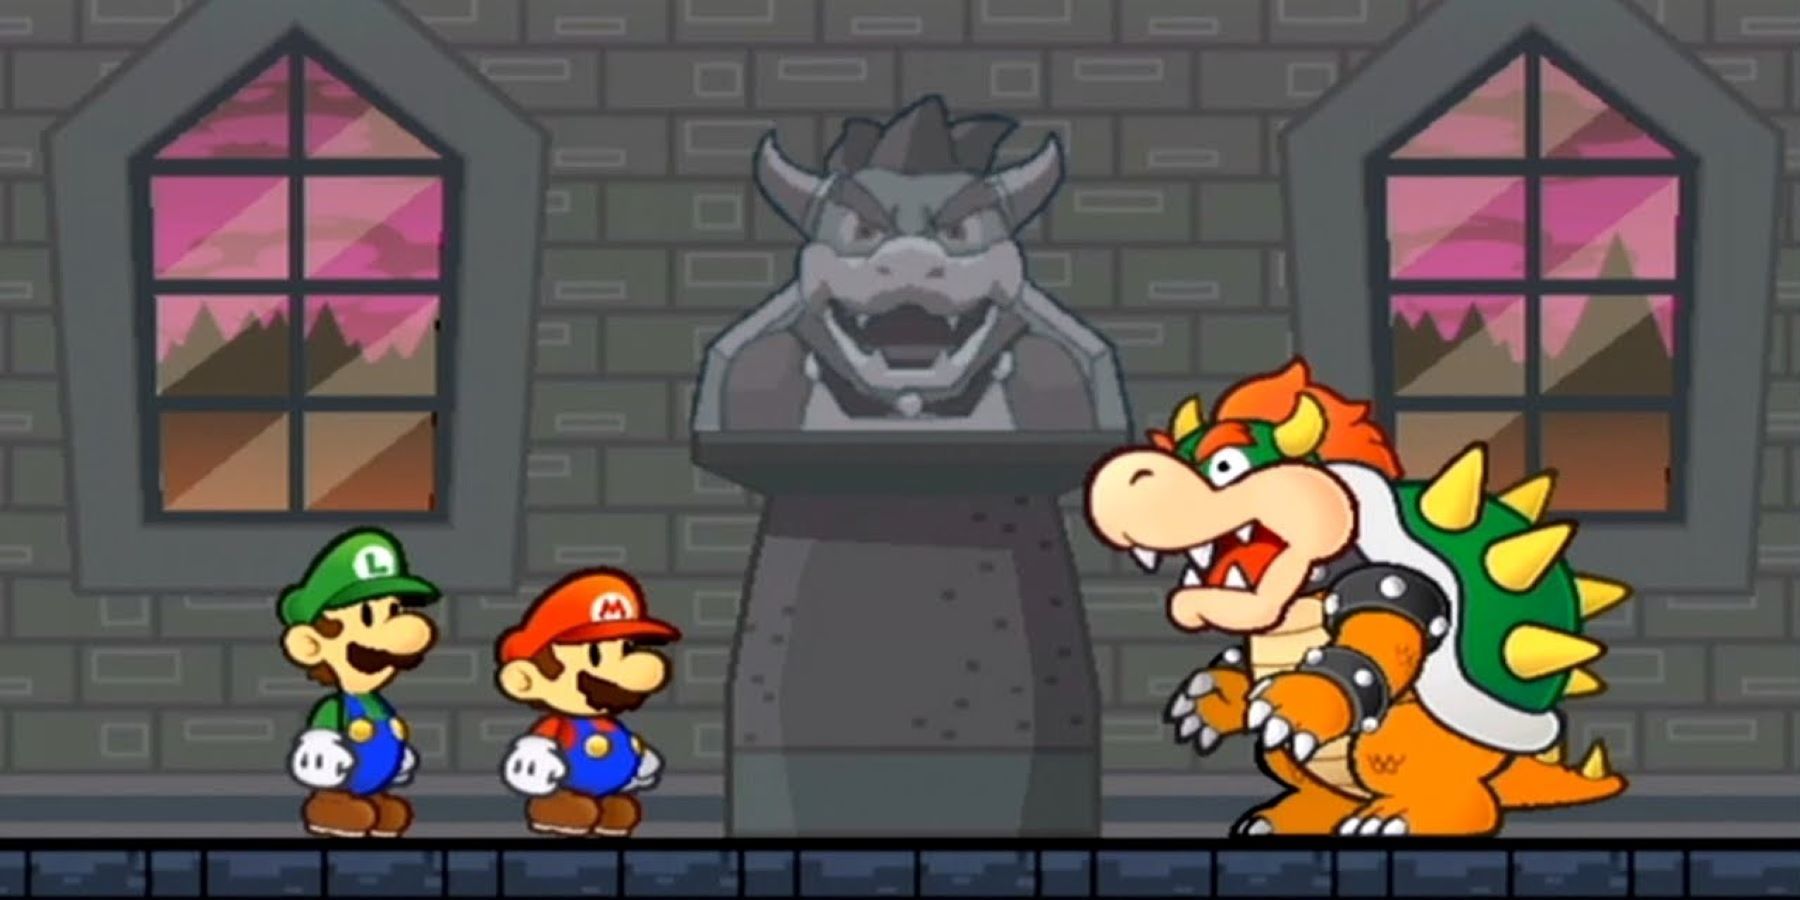 Super Mario's Bowser Should Be The Solo Protagonist of a Future Game